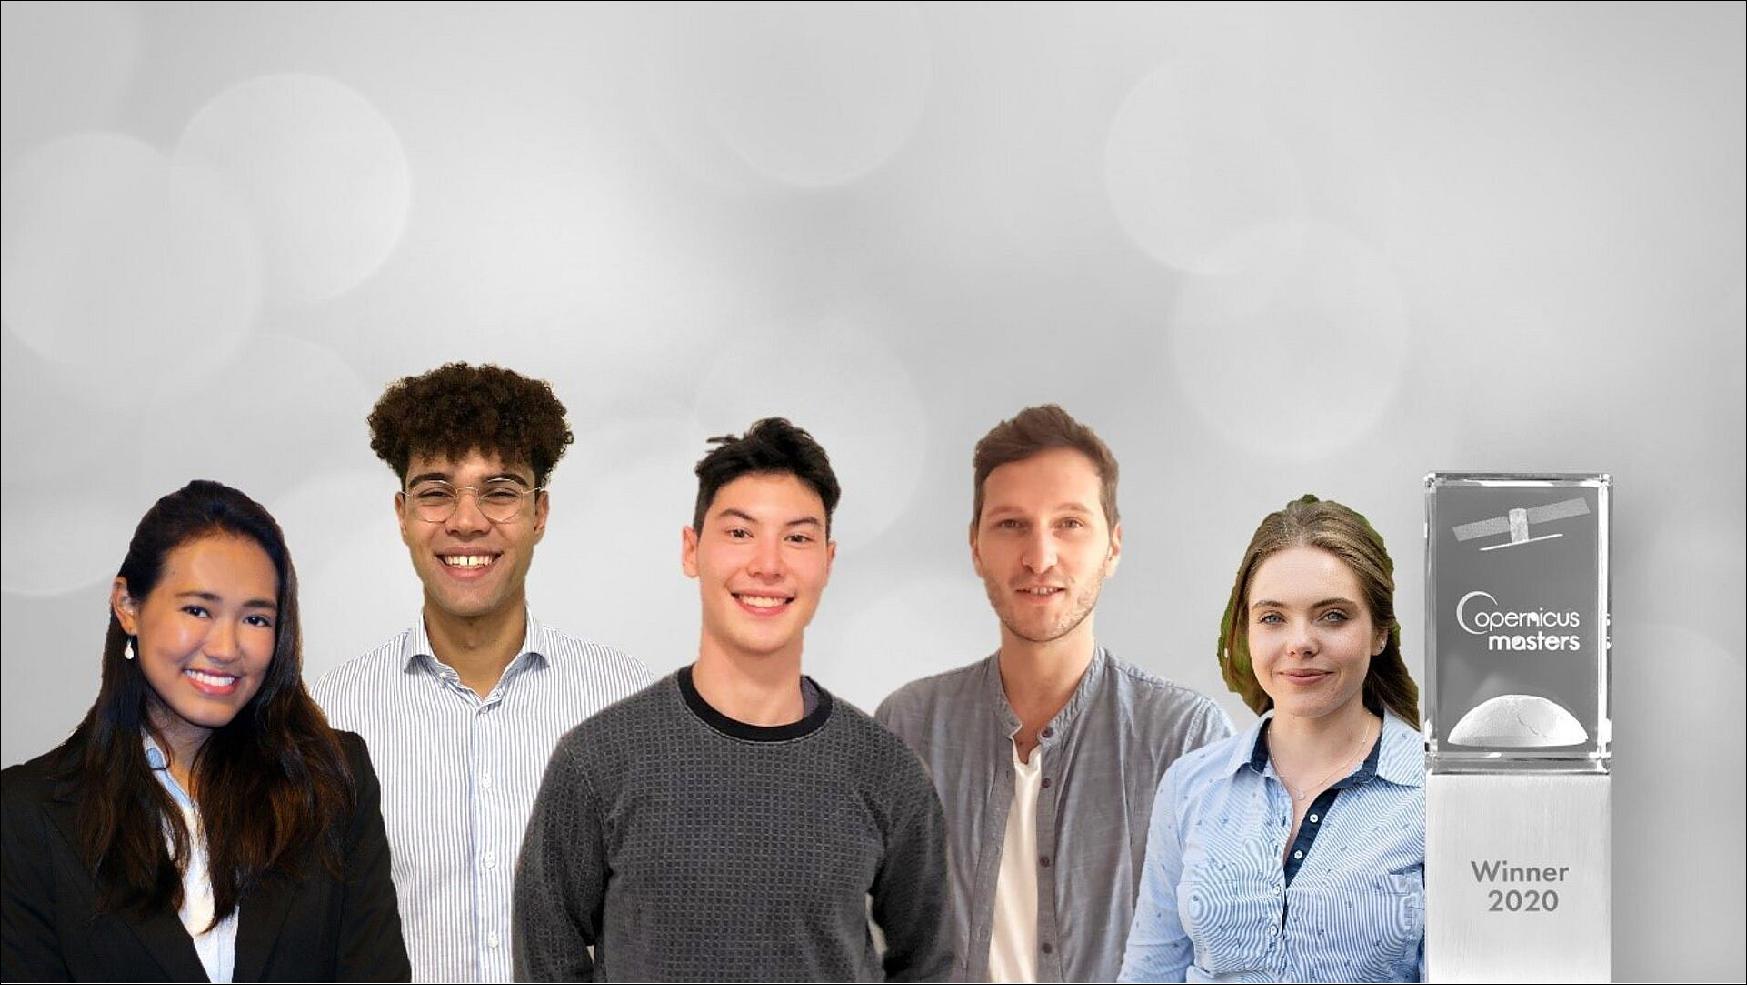 Figure 2: Reef Support team. The Team of Reef Support won the 2020 Copernicus Masters competition. From left to right: Crystle Wee, Yohan Runhaar, Marcel Kempers, Marijn van der Laan, Eilidh Radcliff. The innovative idea uses Copernicus Sentinel data and artificial intelligence to detect coral bleaching, algal blooms, sediment plumes and debris (image credit: Reef Support)